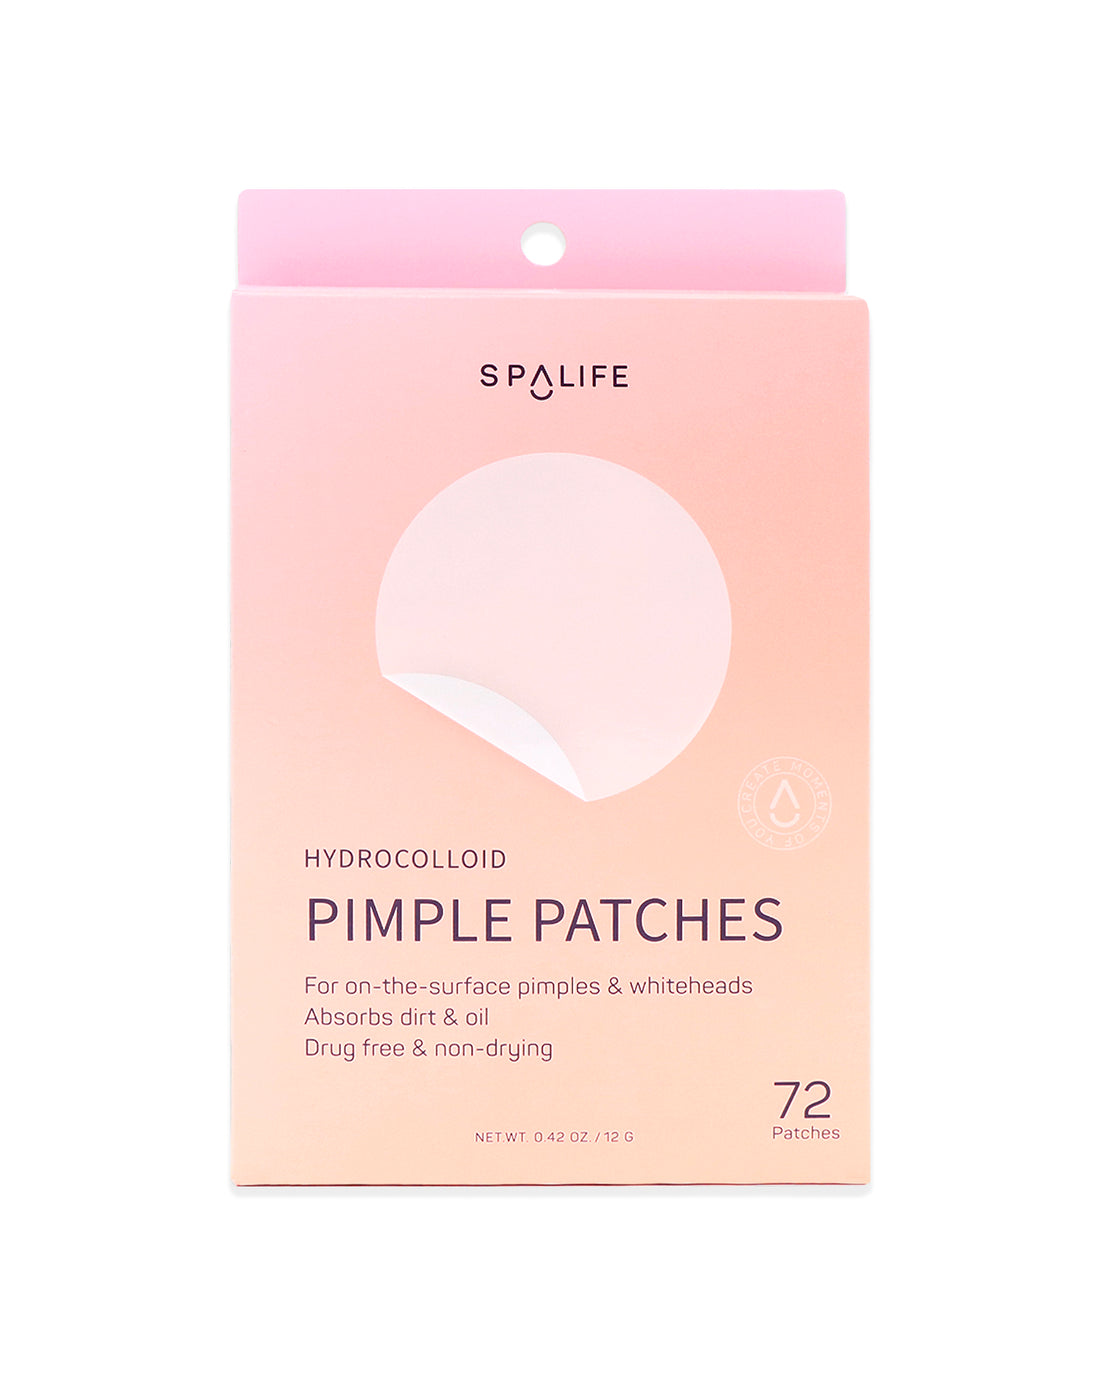 Hydrocolloid_pimple_patches_pa-206